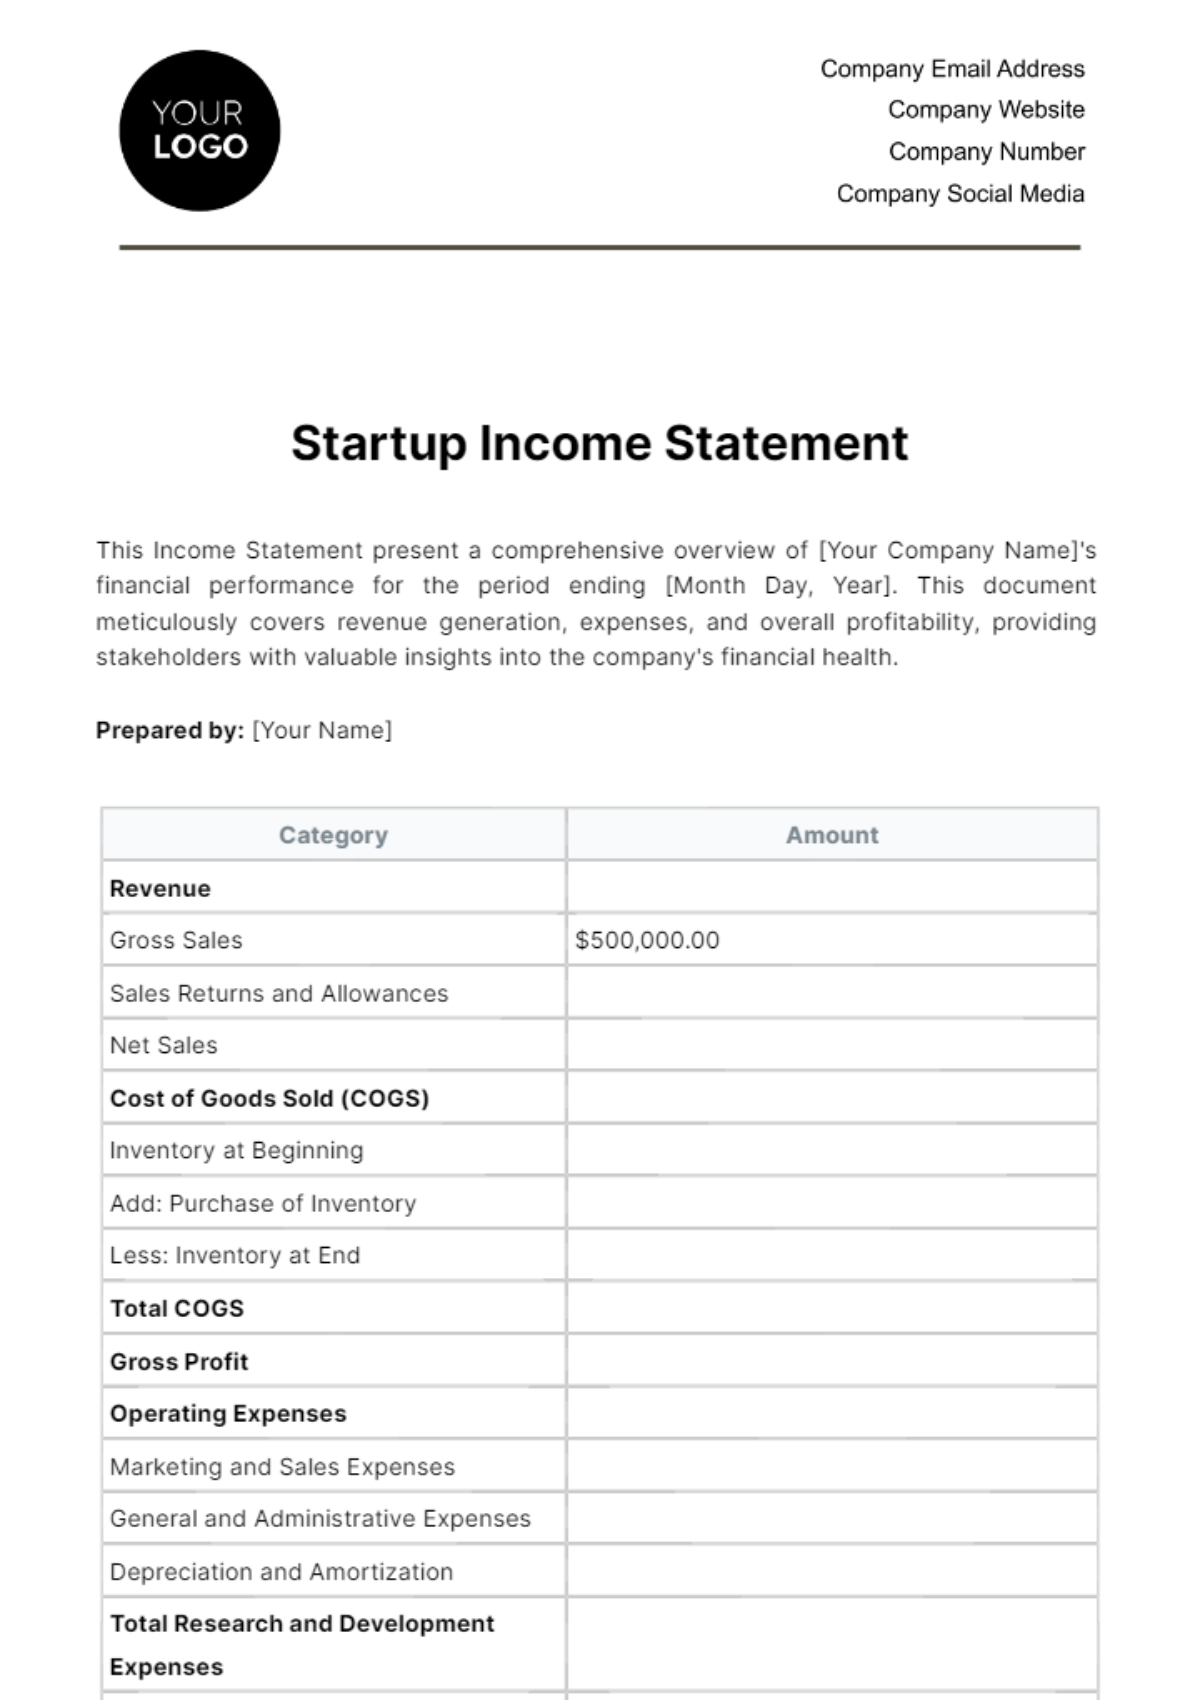 Free Startup Income Statement Template